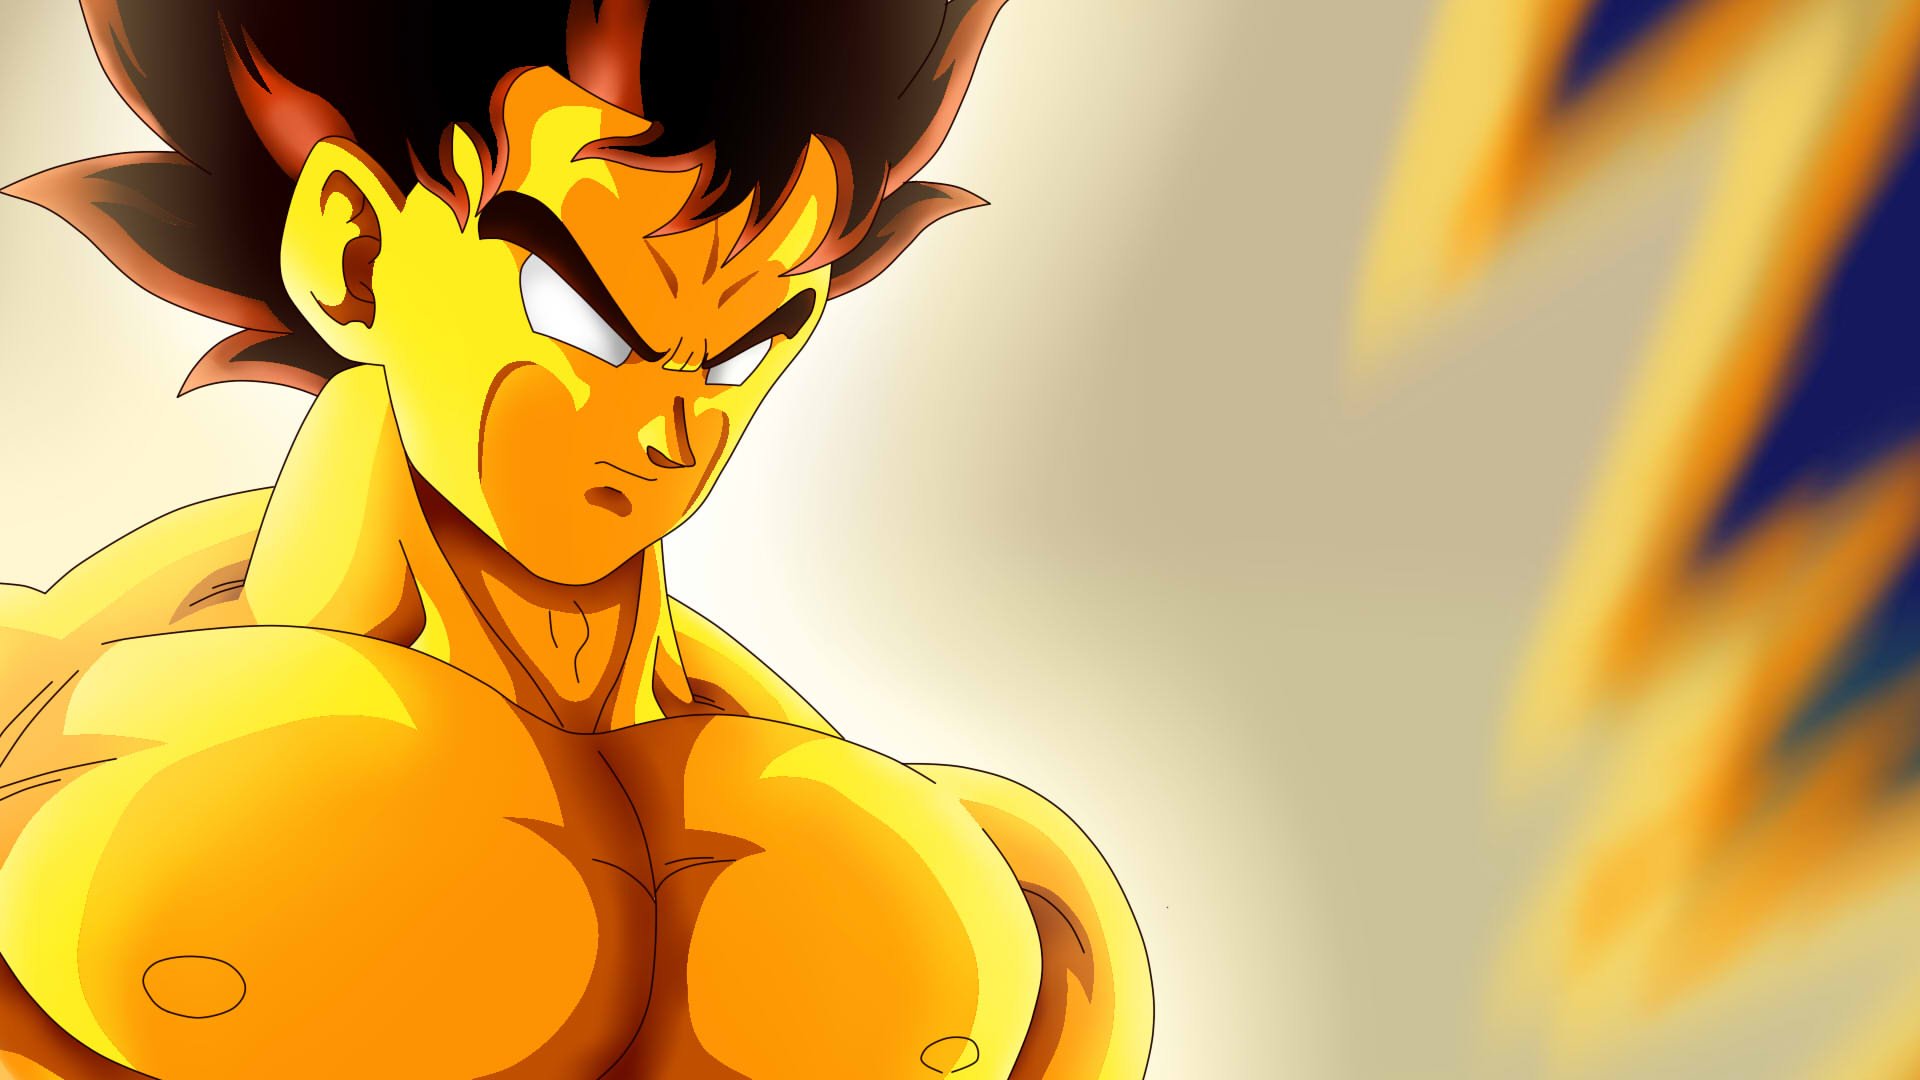 srojam finished this False SSJ Goku! I don't see much art for this form and it is one of my favorites due to the badass moment it had. I'd